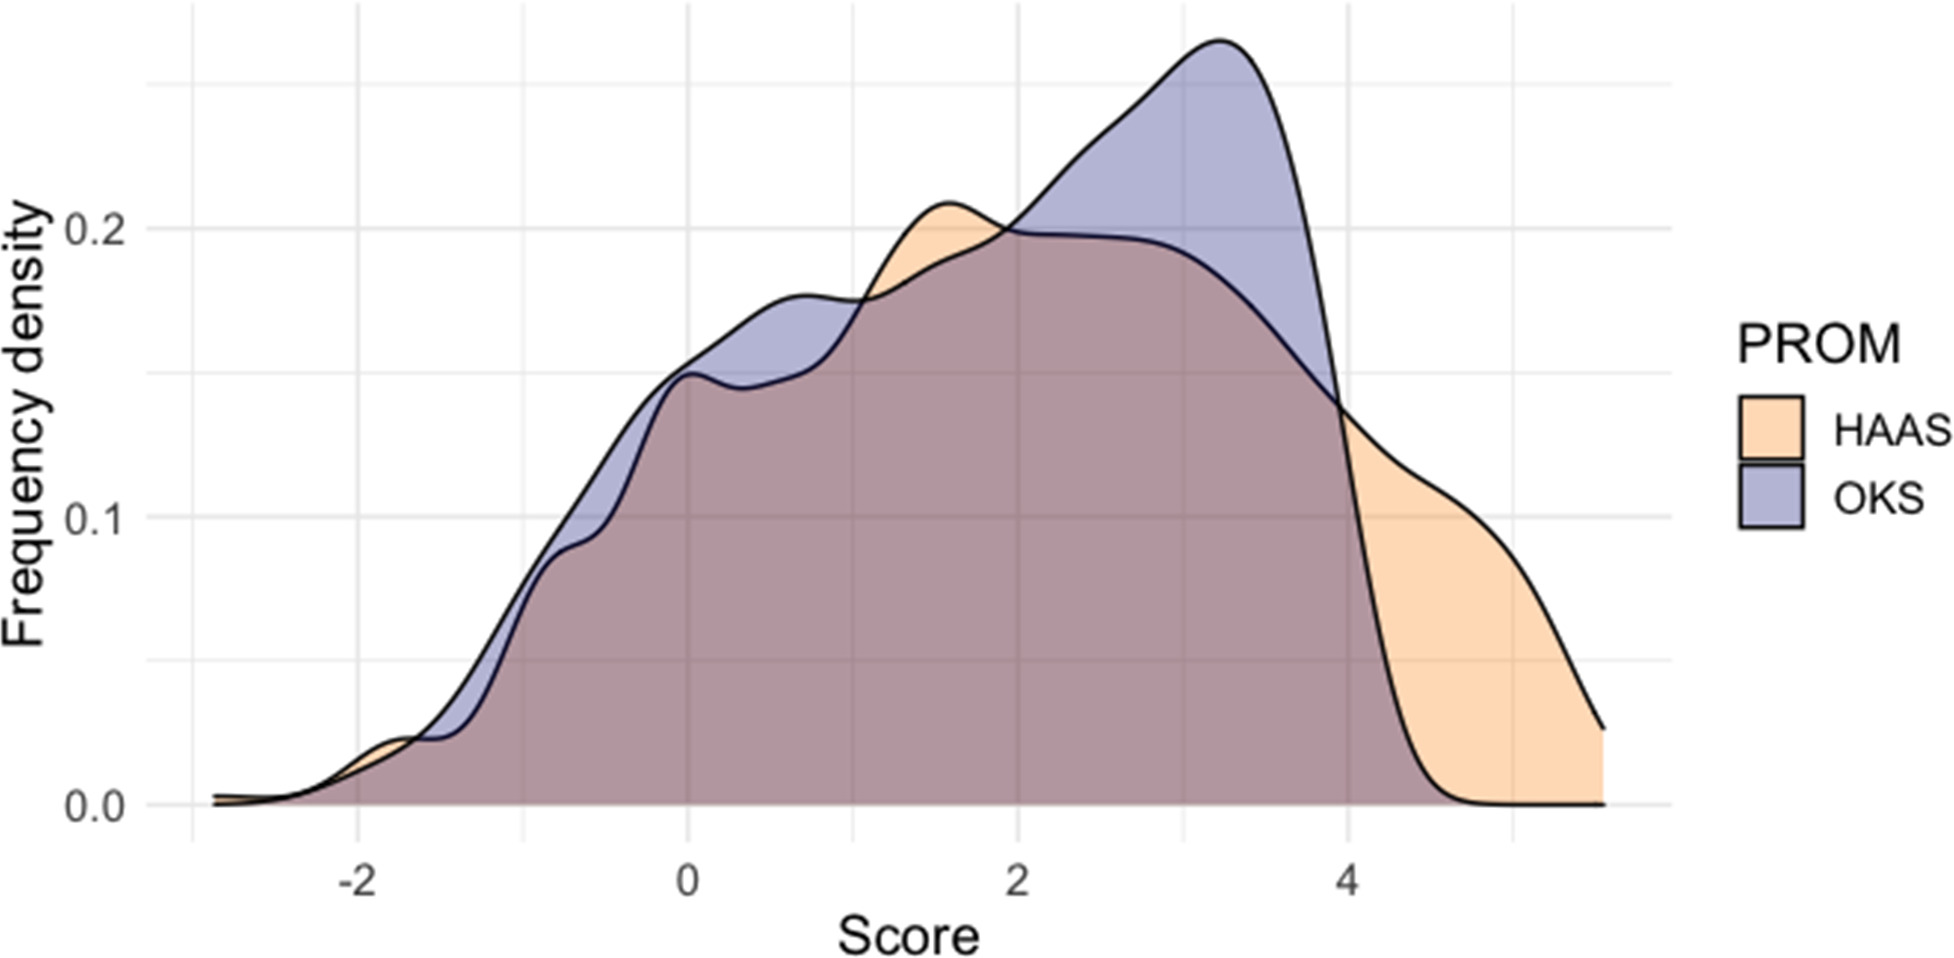 Fig. 5 
            Distribution of paired common scale scores derived from the Oxford Knee Score (OKS) and High Activity Arthroplasty Score (HAAS). PROM, patient-reported outcome measure.
          